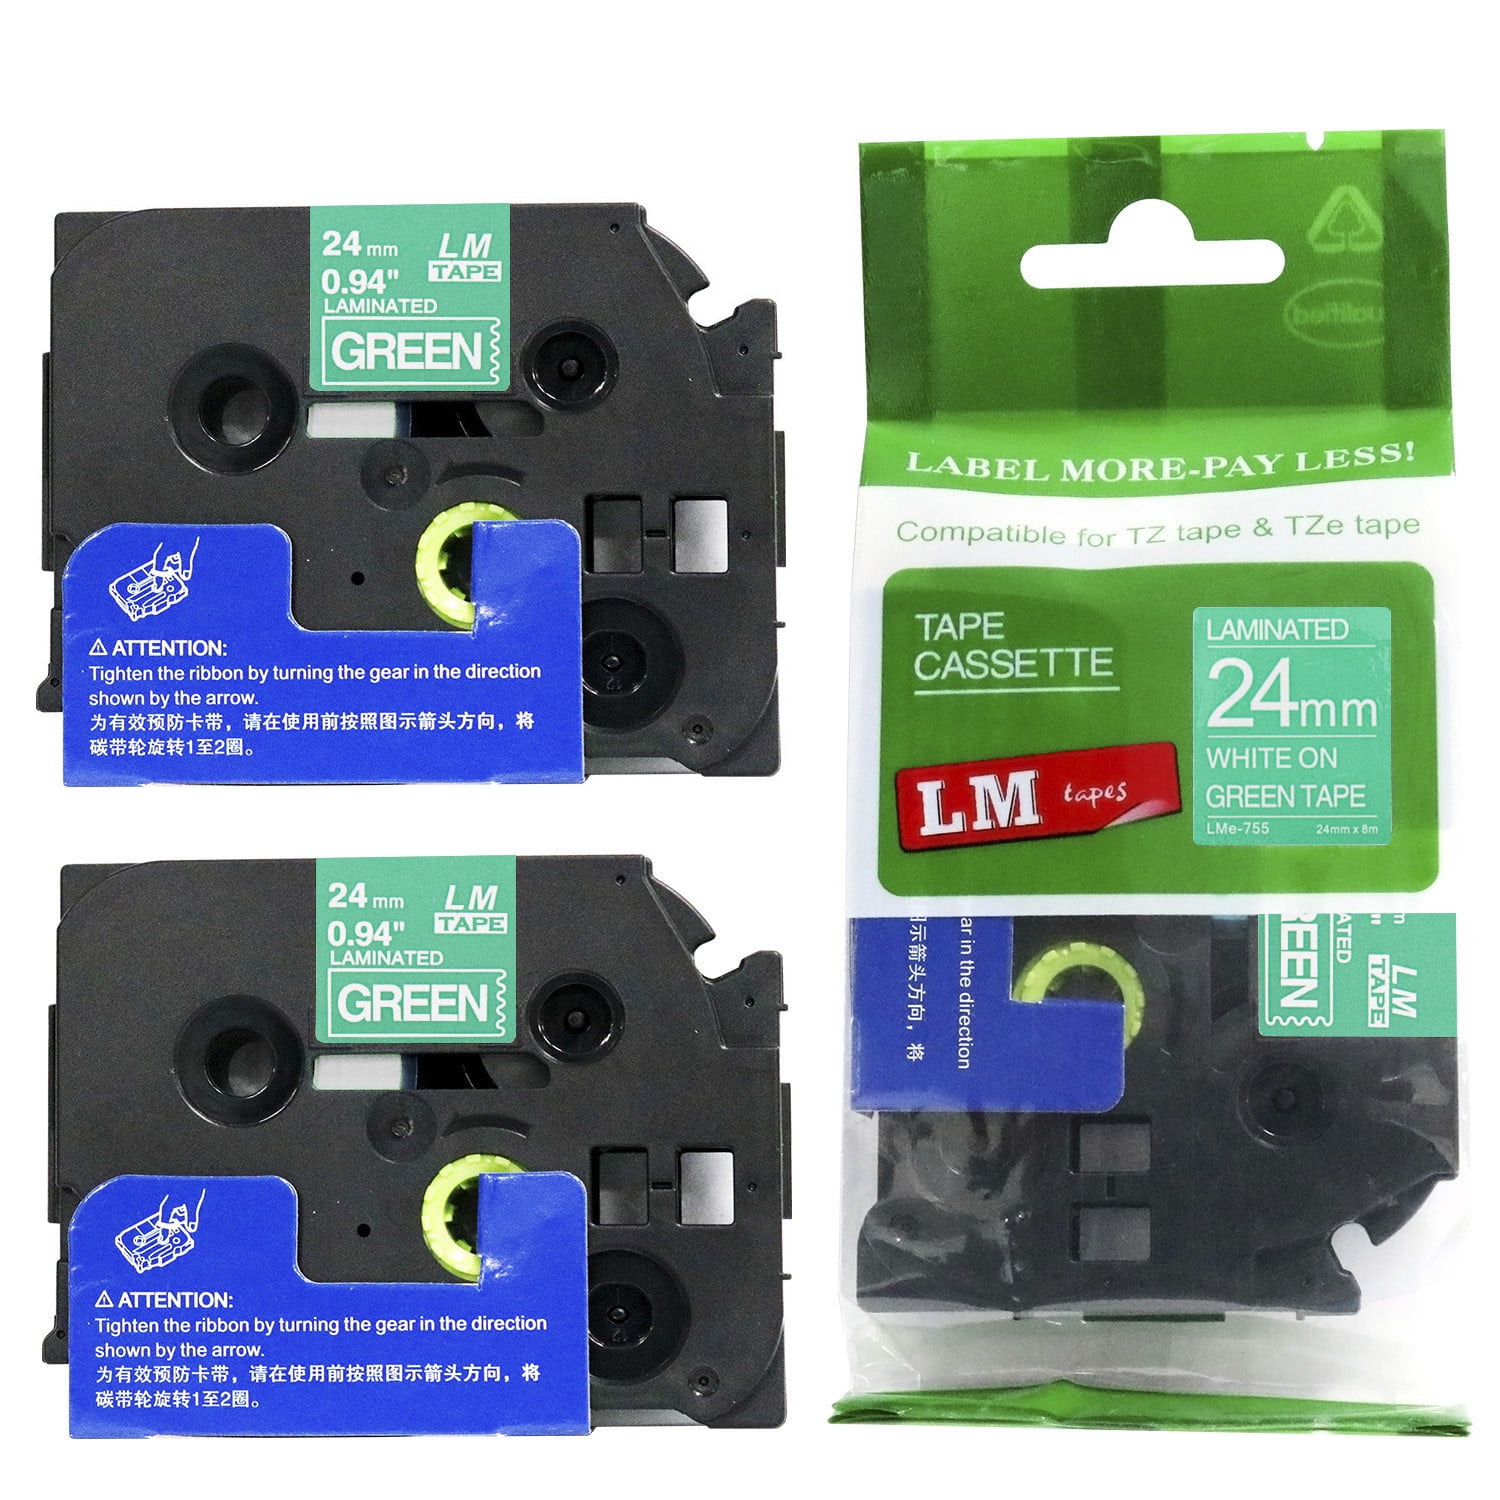 5 Pack Colors Compatible Brother P-Touch Laminated TZ Tz TZe Label Tape 24mm 1''